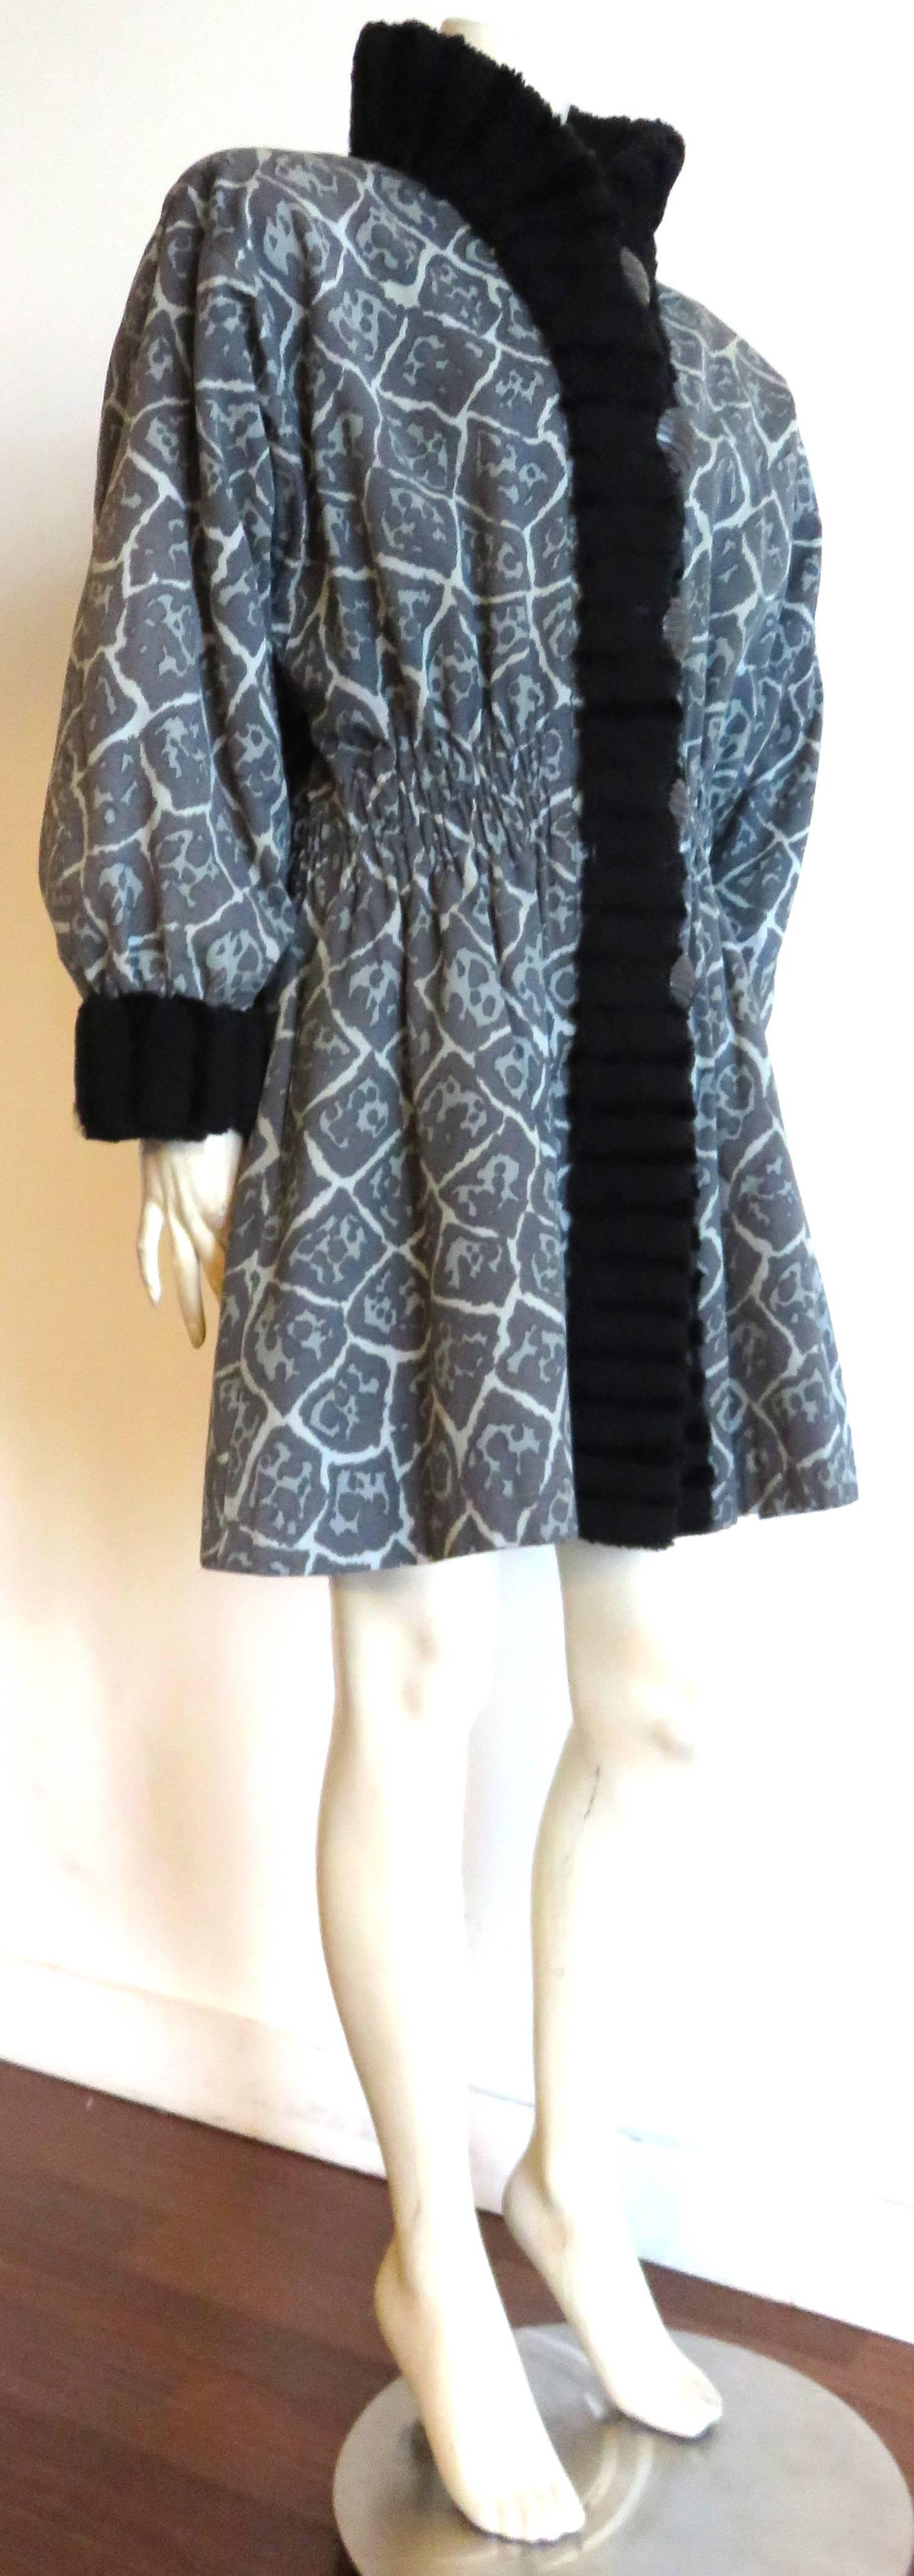 1980's YVES SAINT LAURENT FURS Printed coat In Good Condition For Sale In Newport Beach, CA